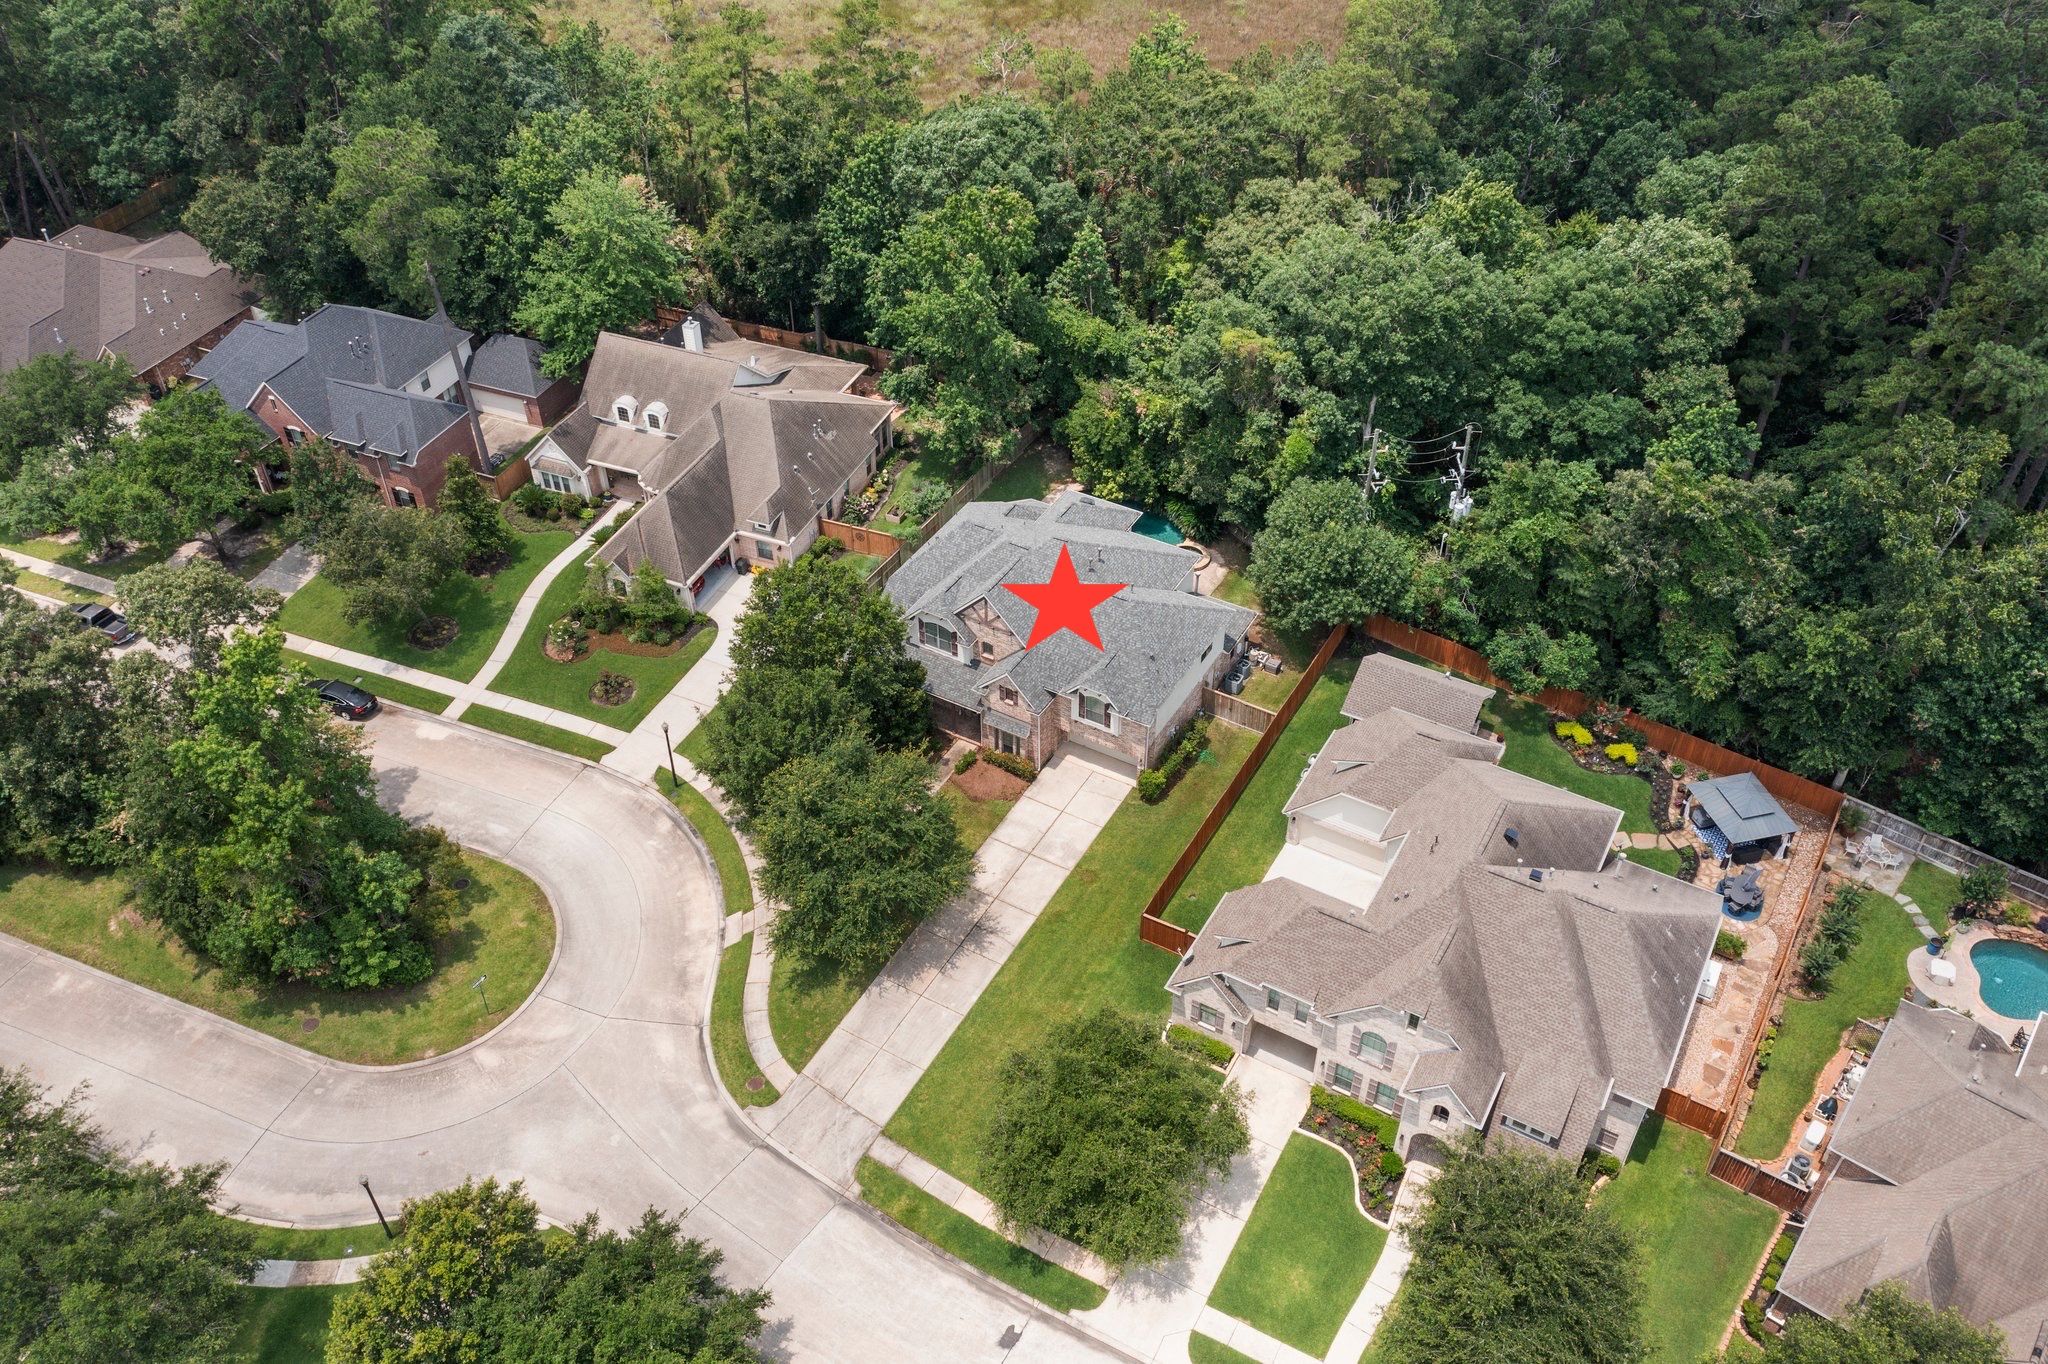 Aerial view showing location of home in culdesac.